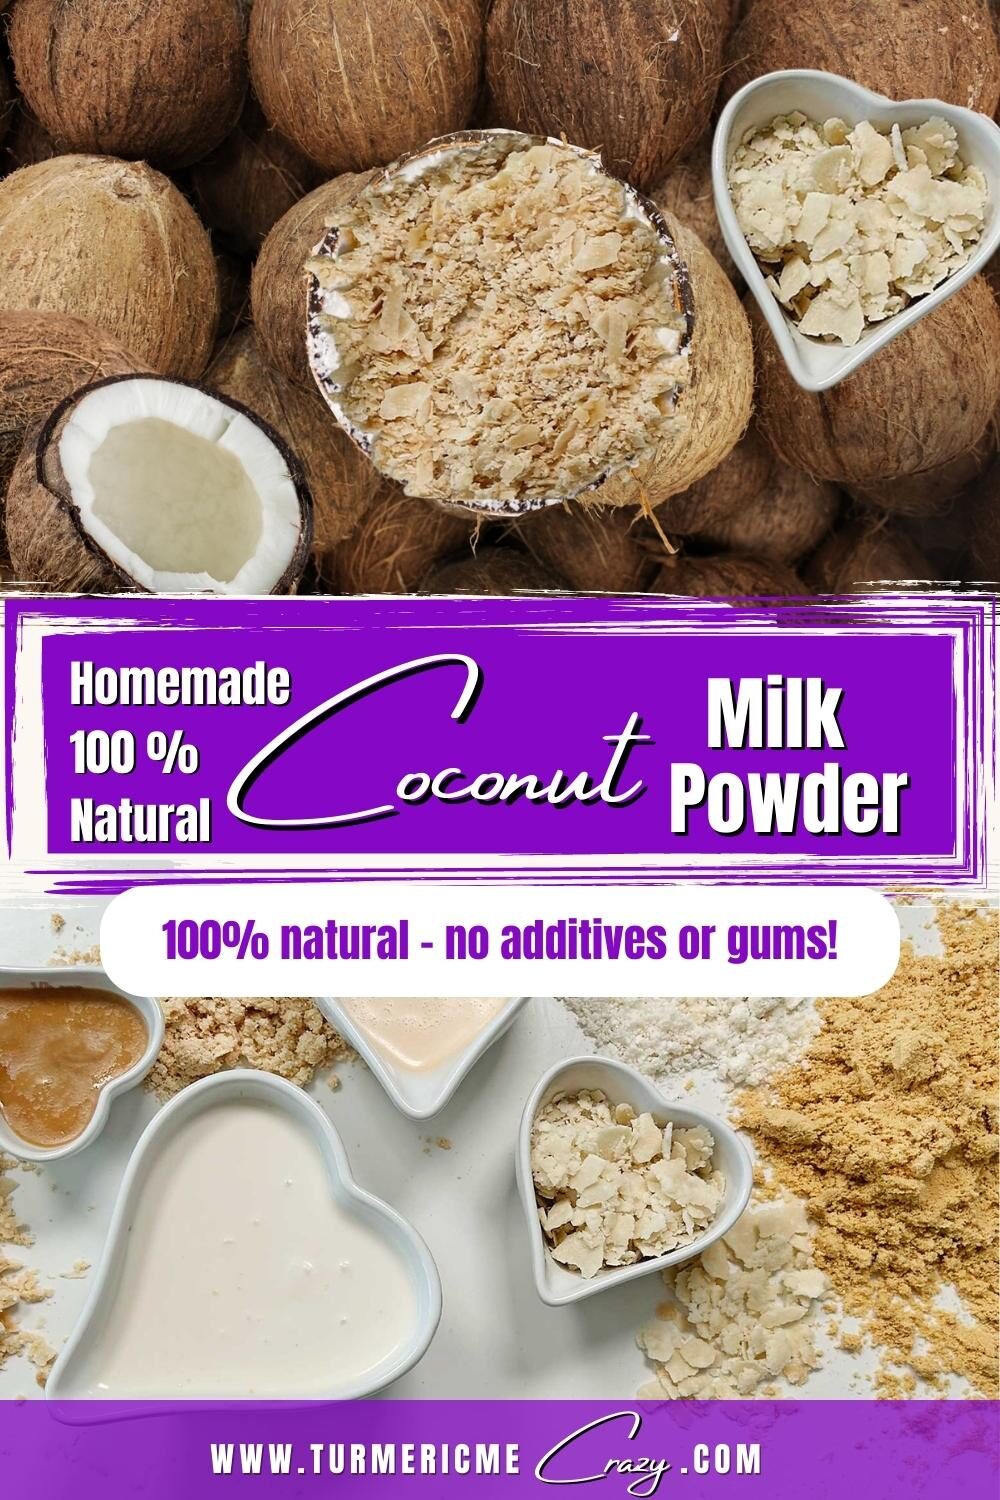 Easily make your own incredibly delicious coconut milk powder, a lovely plant based dried milk, from just organic shredded coconut! Let us show you how! It's 100% natural dried coconut milk with no additives, preservatives, emulsifiers or gums! Give it a try and I promise, you'll never buy store bought again!